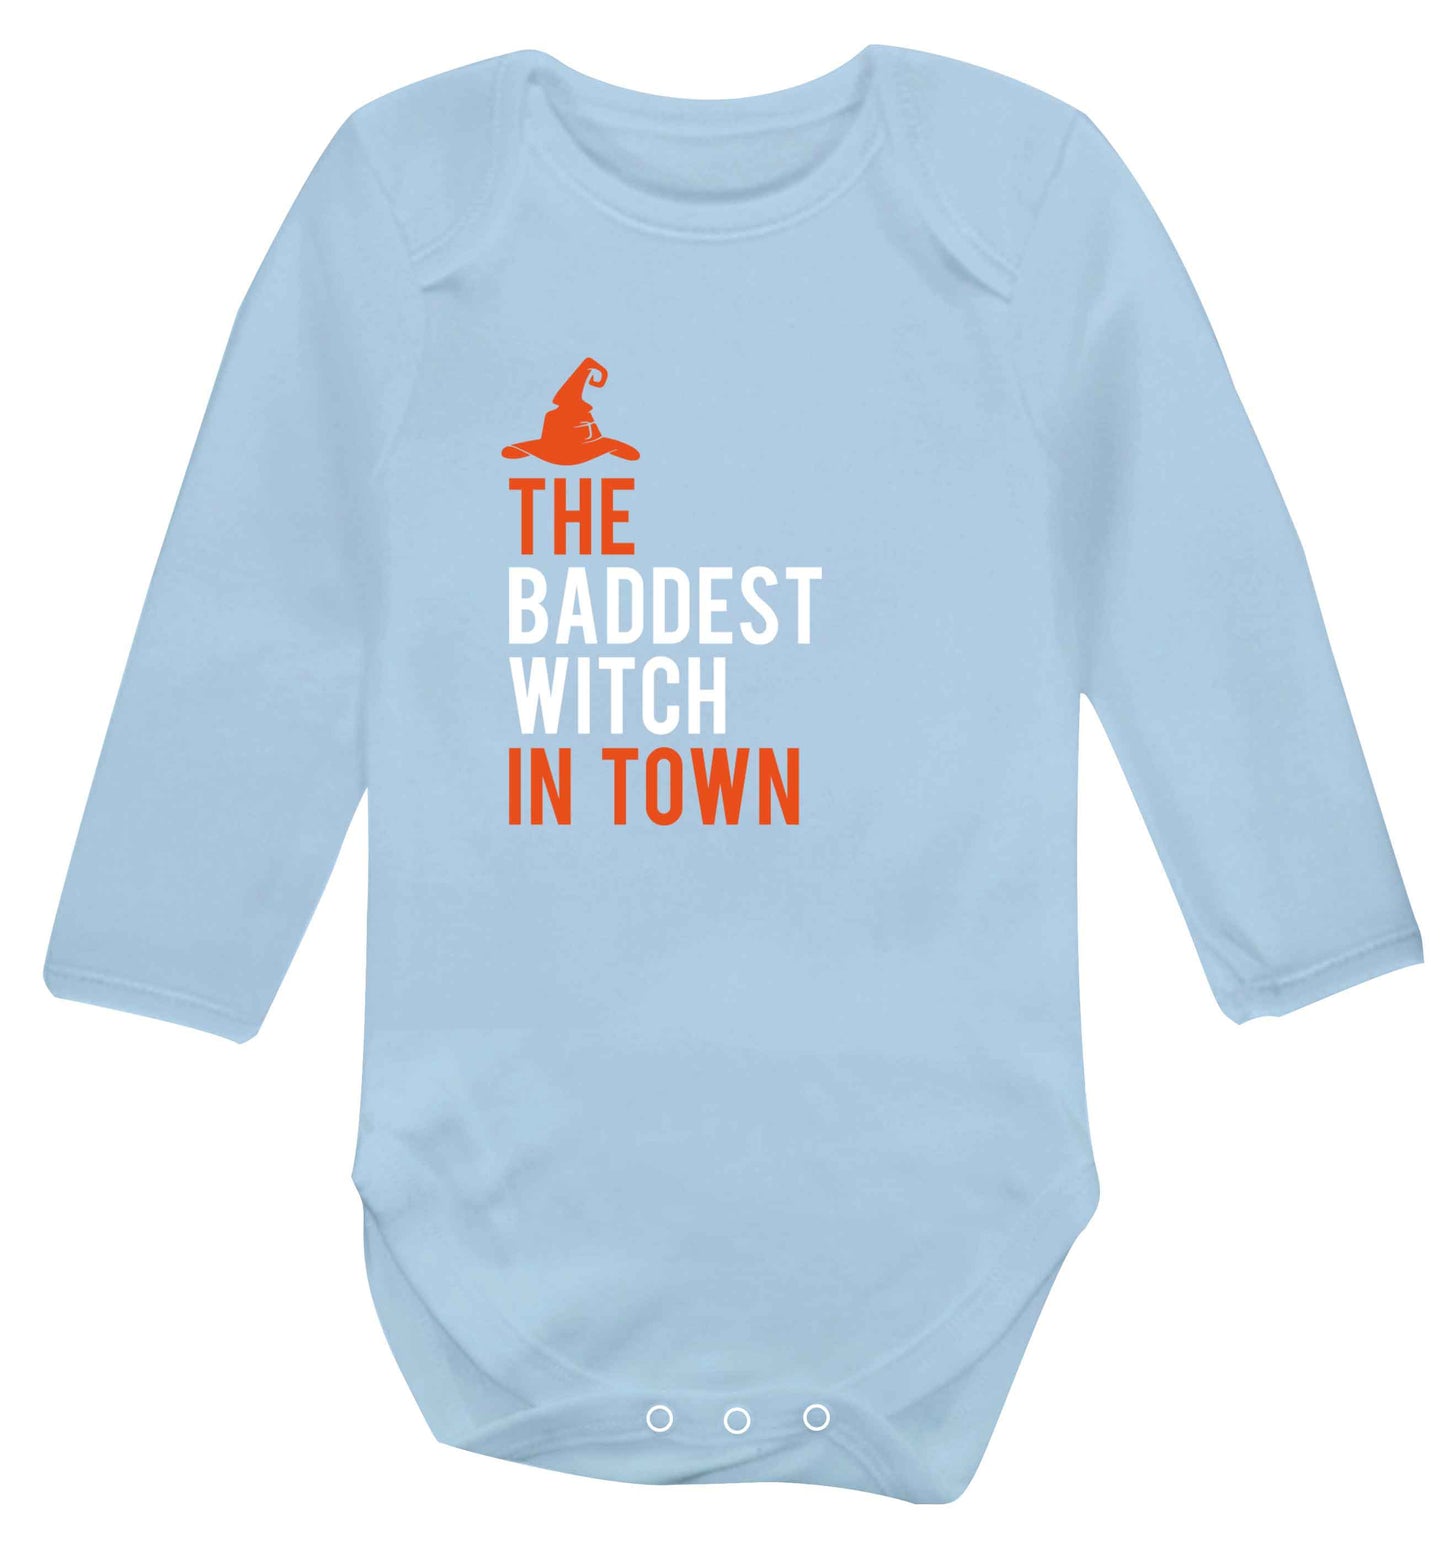 Badest witch in town baby vest long sleeved pale blue 6-12 months